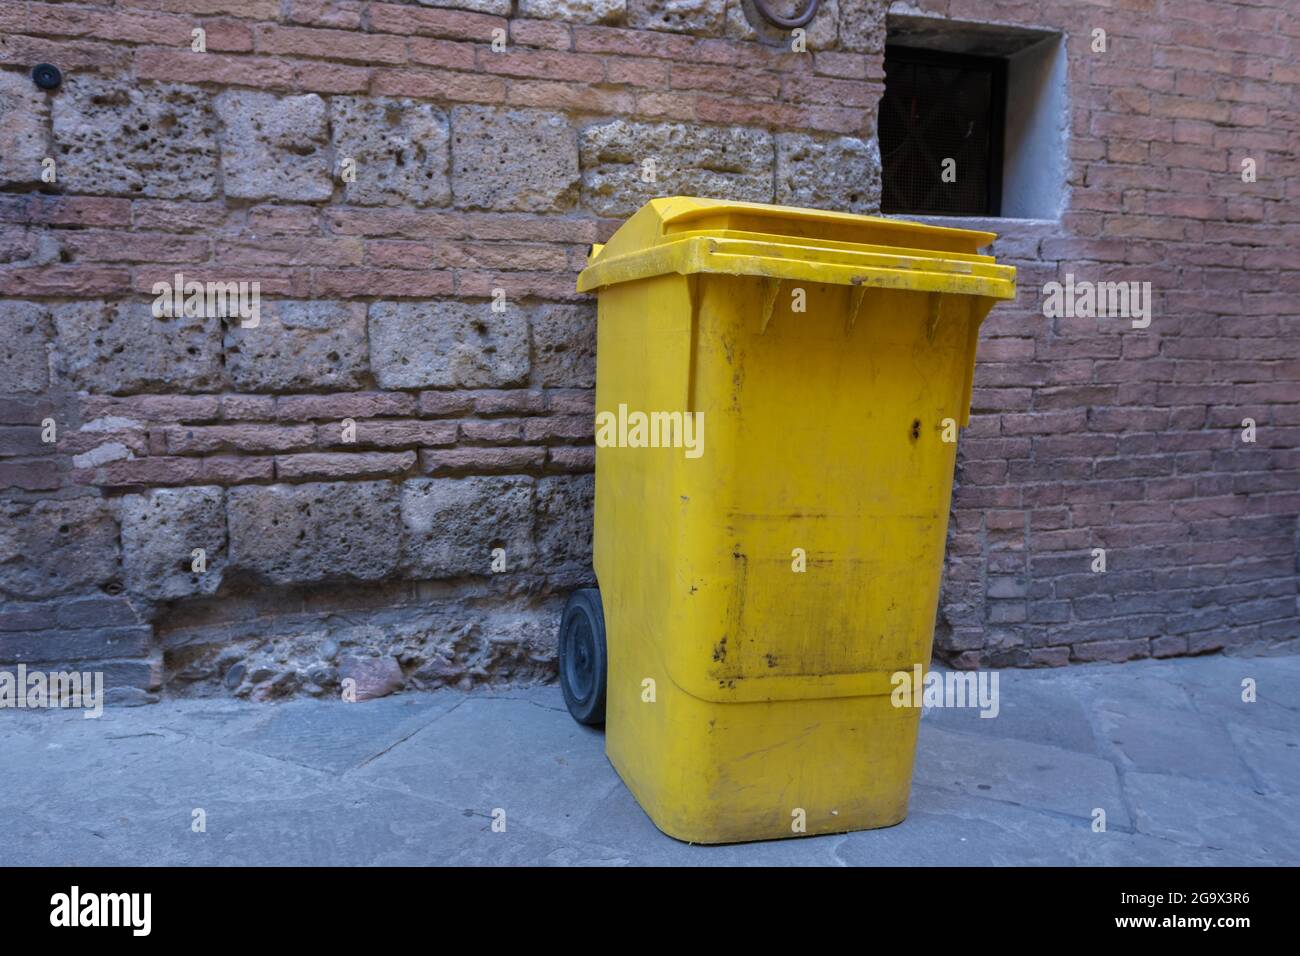 Plastic trash can on street of old town Stock Photo